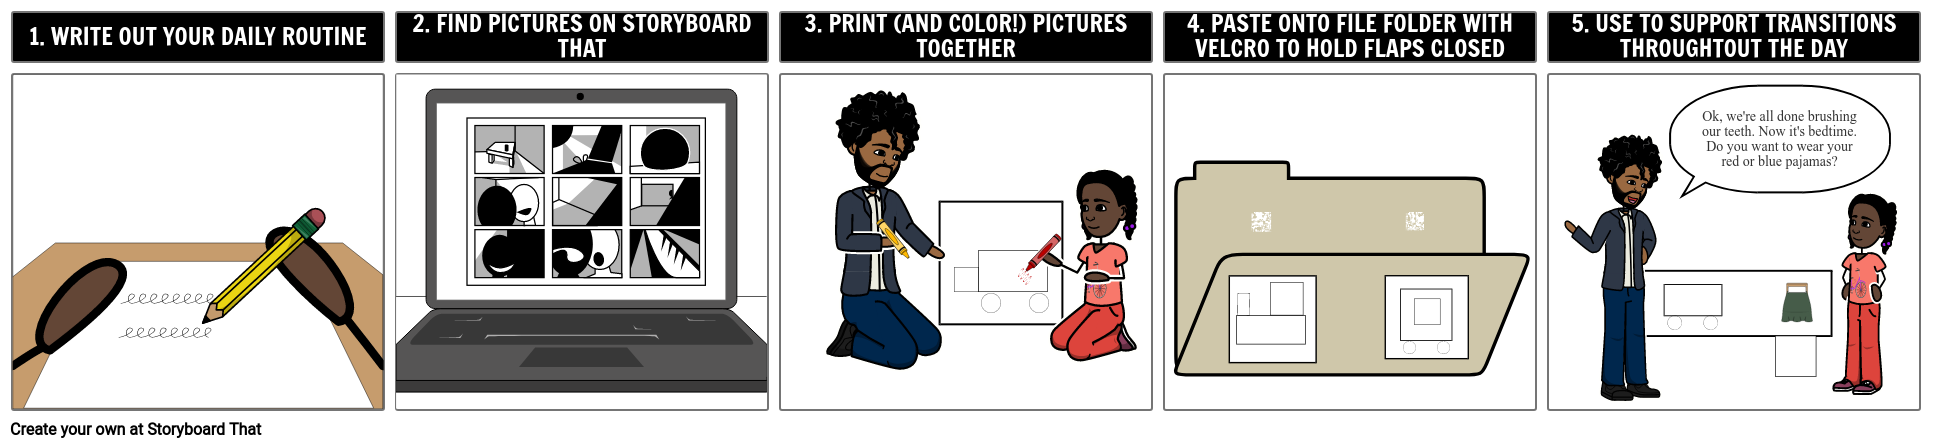 How To Make A Routine Chart on Storyboard That